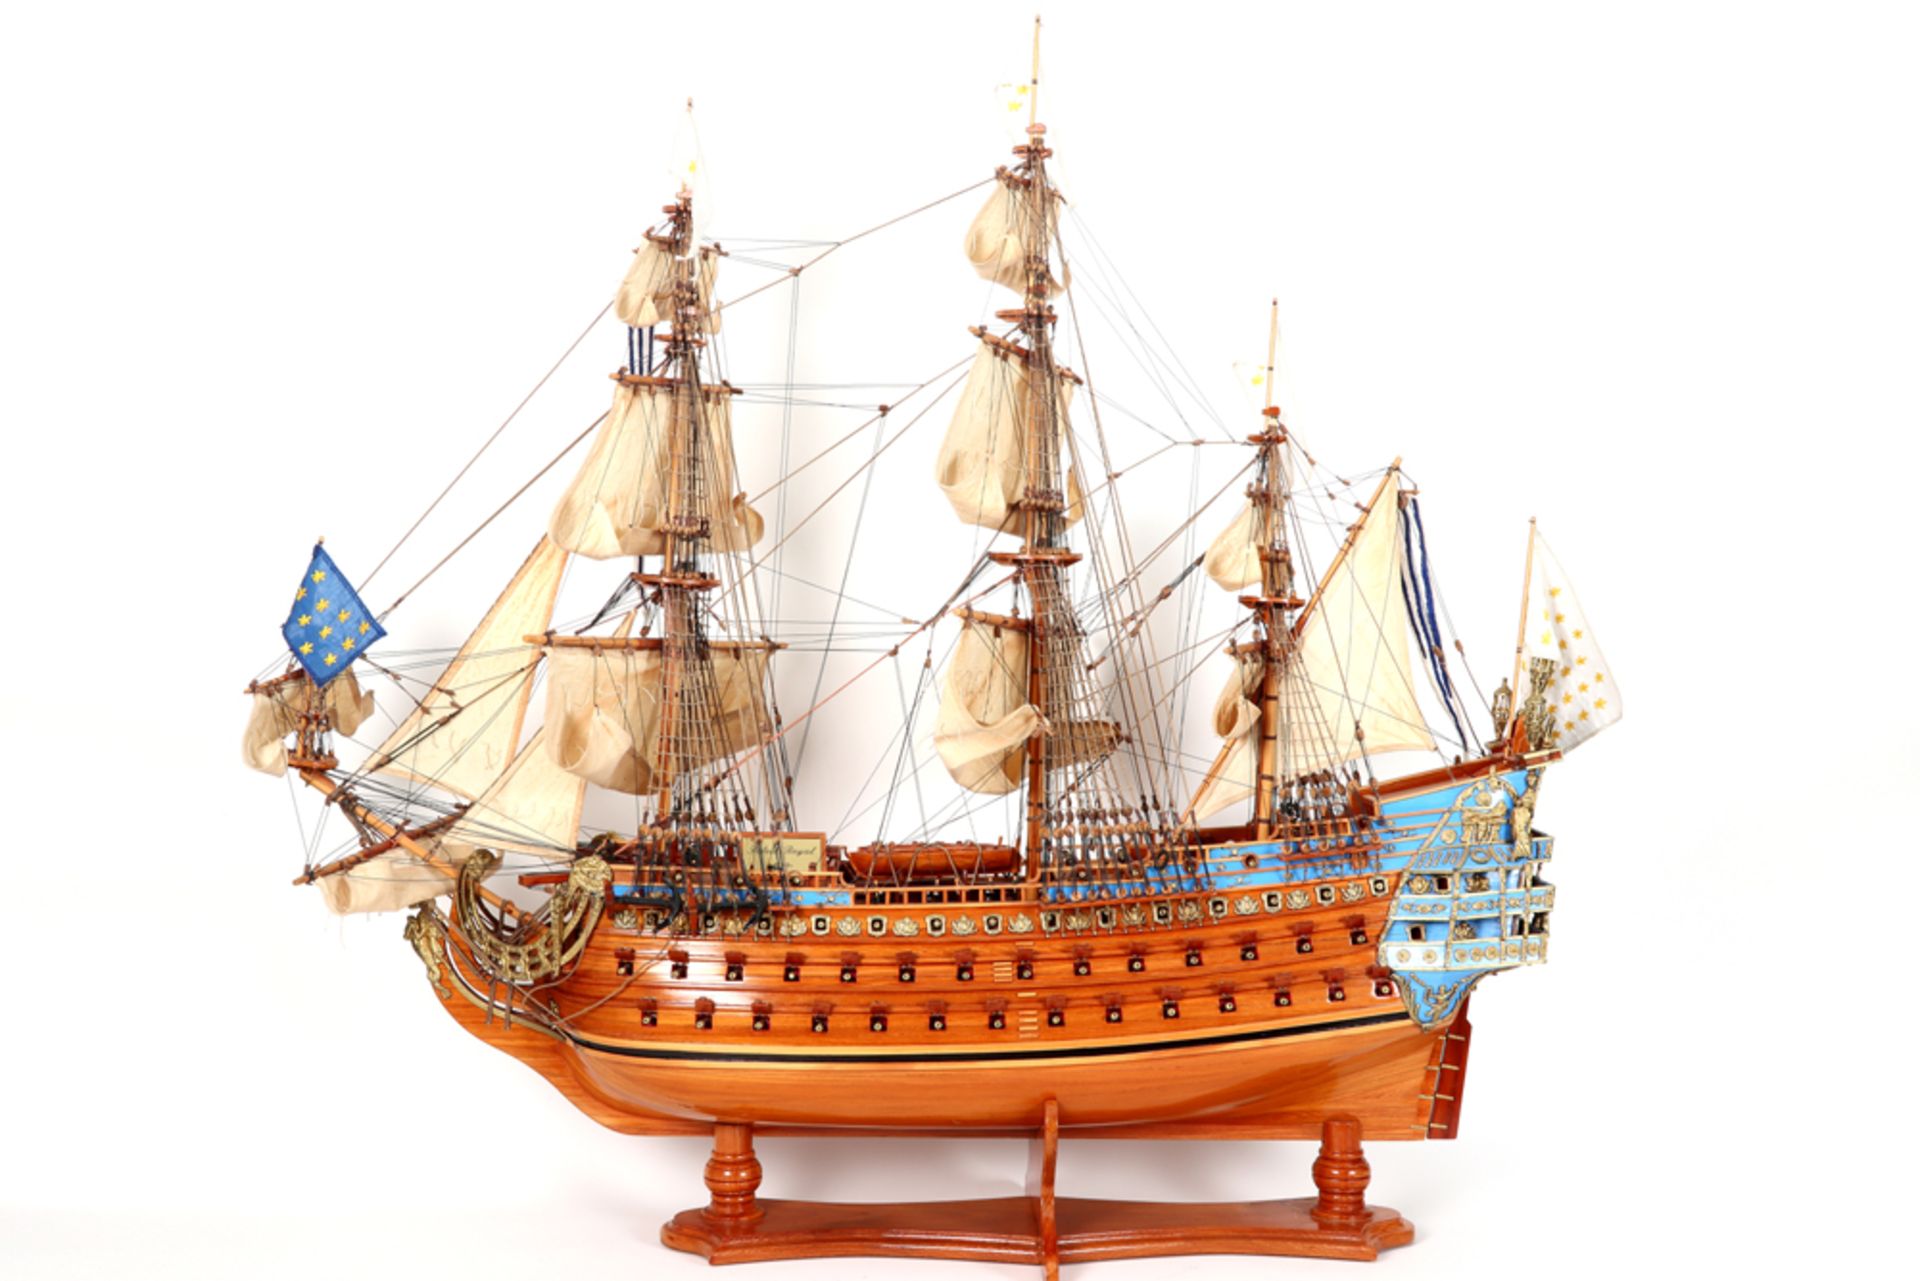 miniature of the "Soleil royal" ship